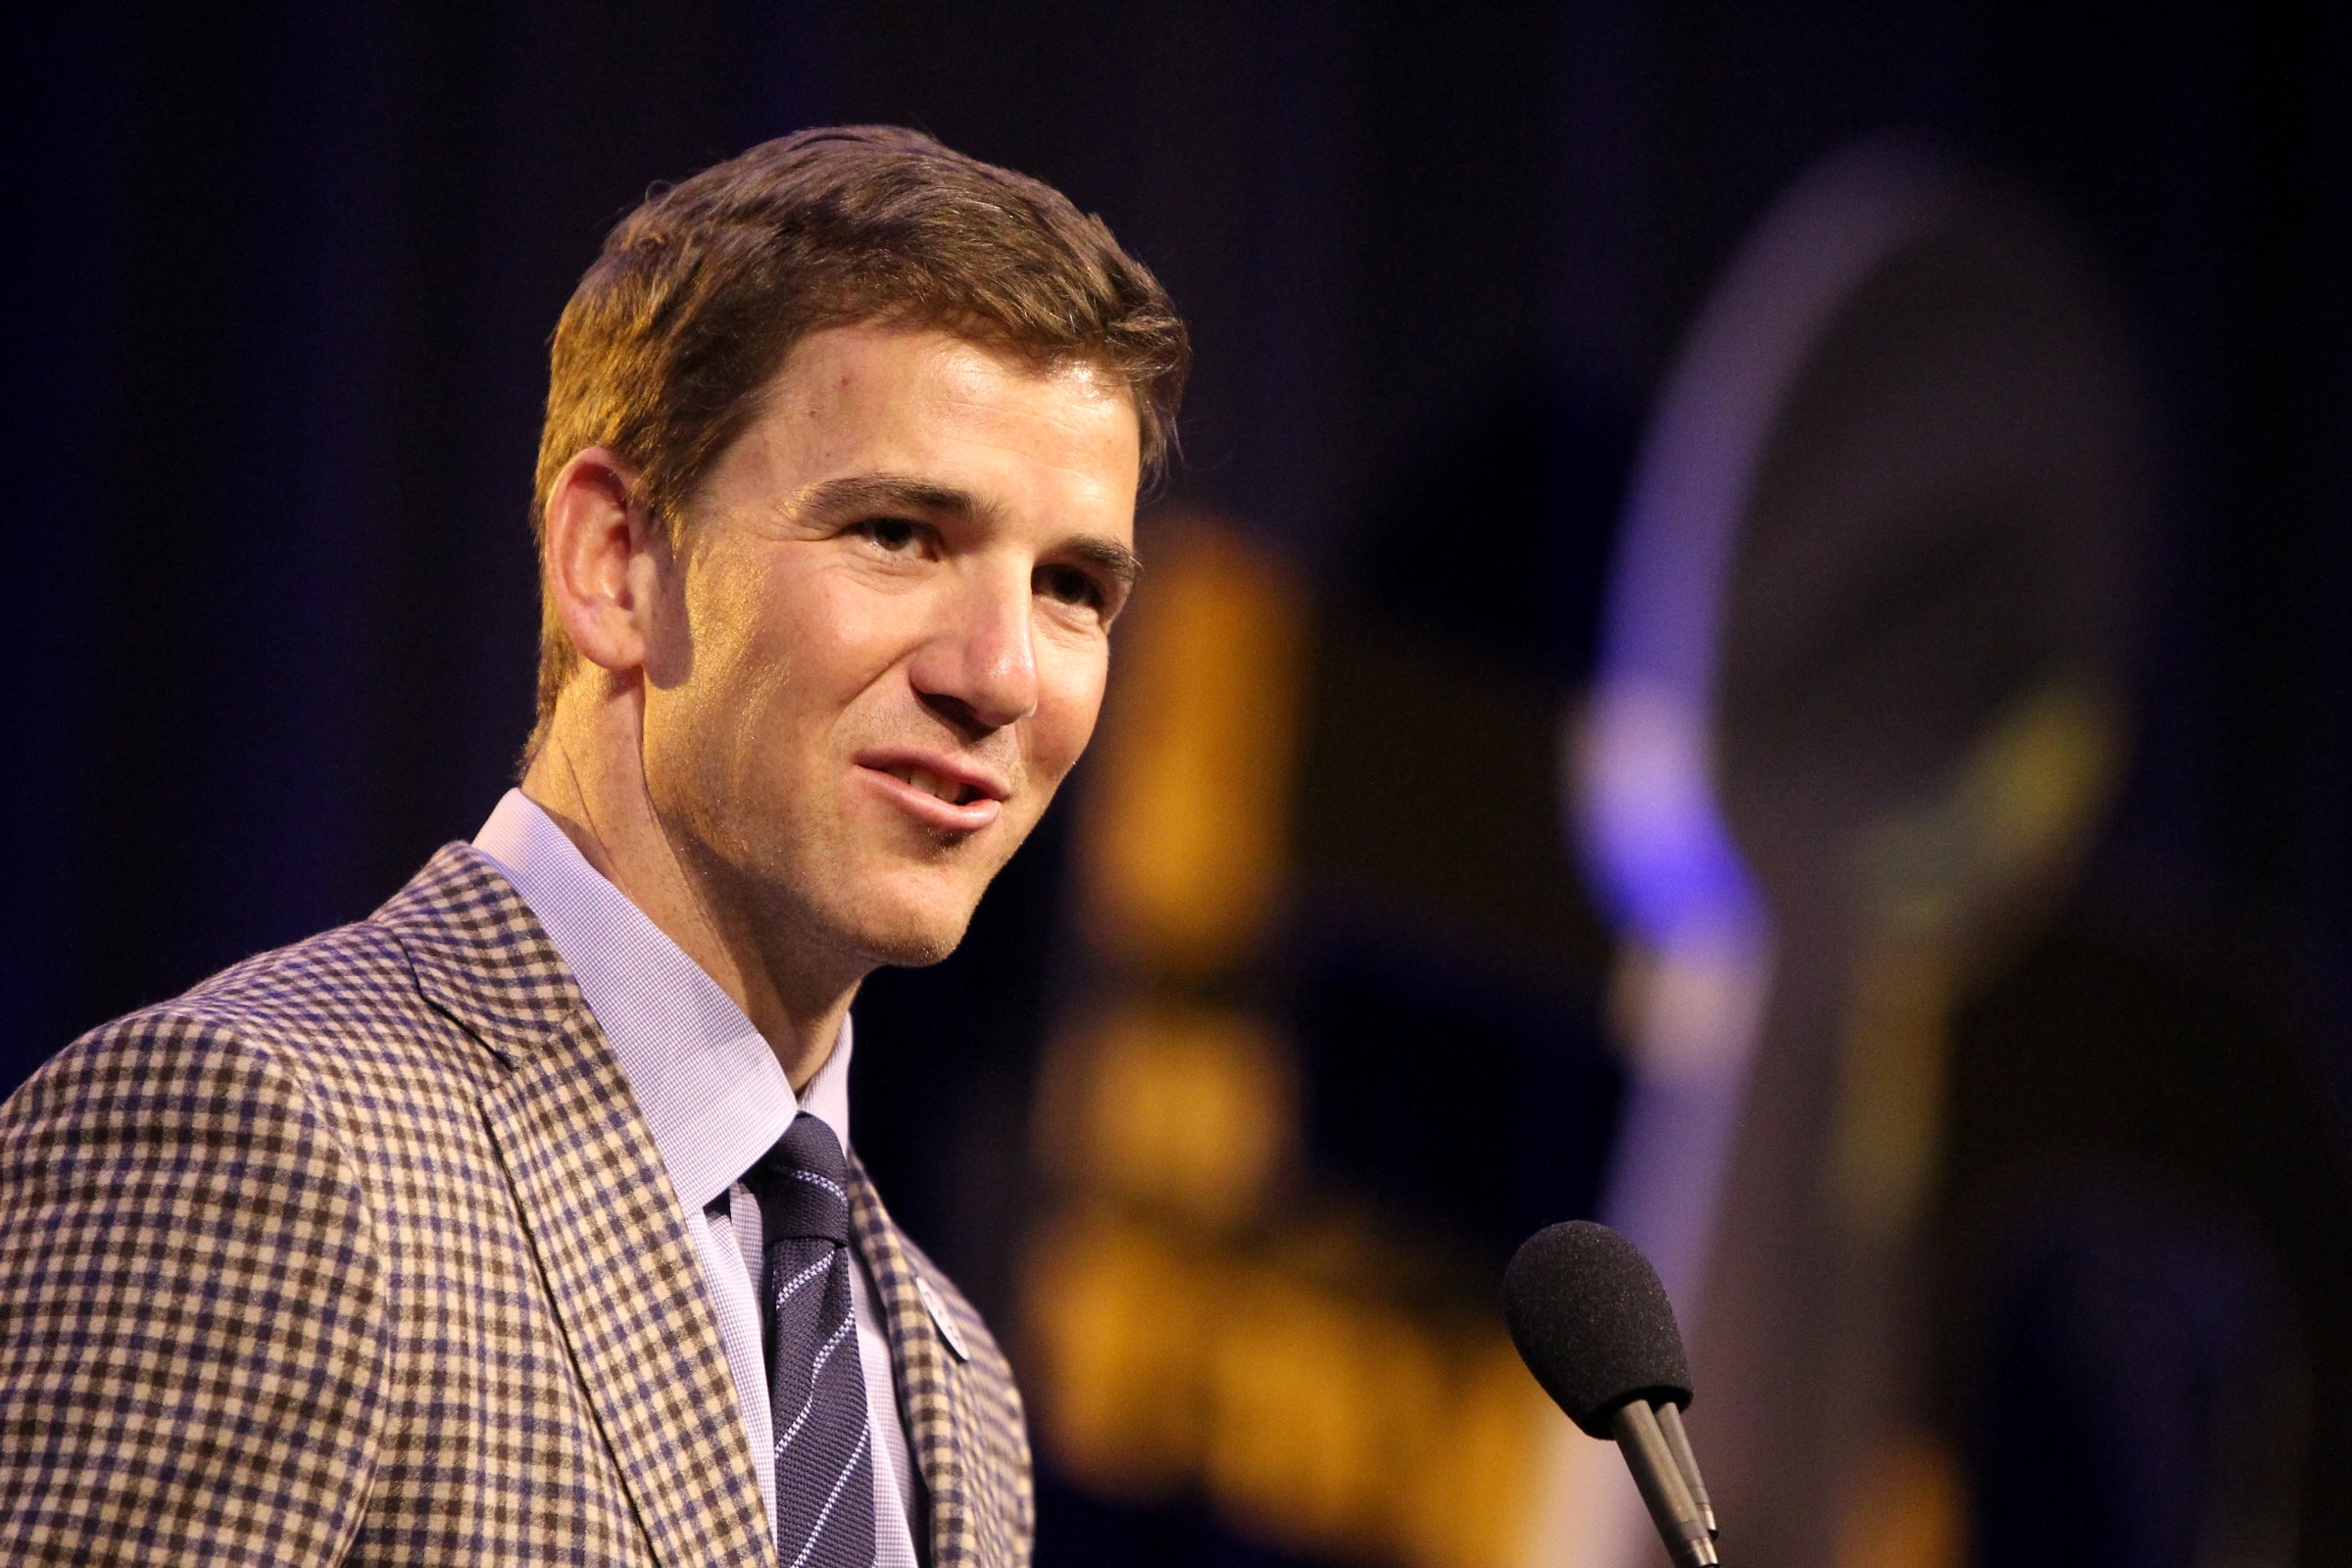 Finalist Eli Manning of the New York Giants speaks during the 2015 Walter Payton Man of the Year Finalist press conference prior to Super Bowl 50 at the Moscone Center West on February 5, 2016 in San Francisco, California.